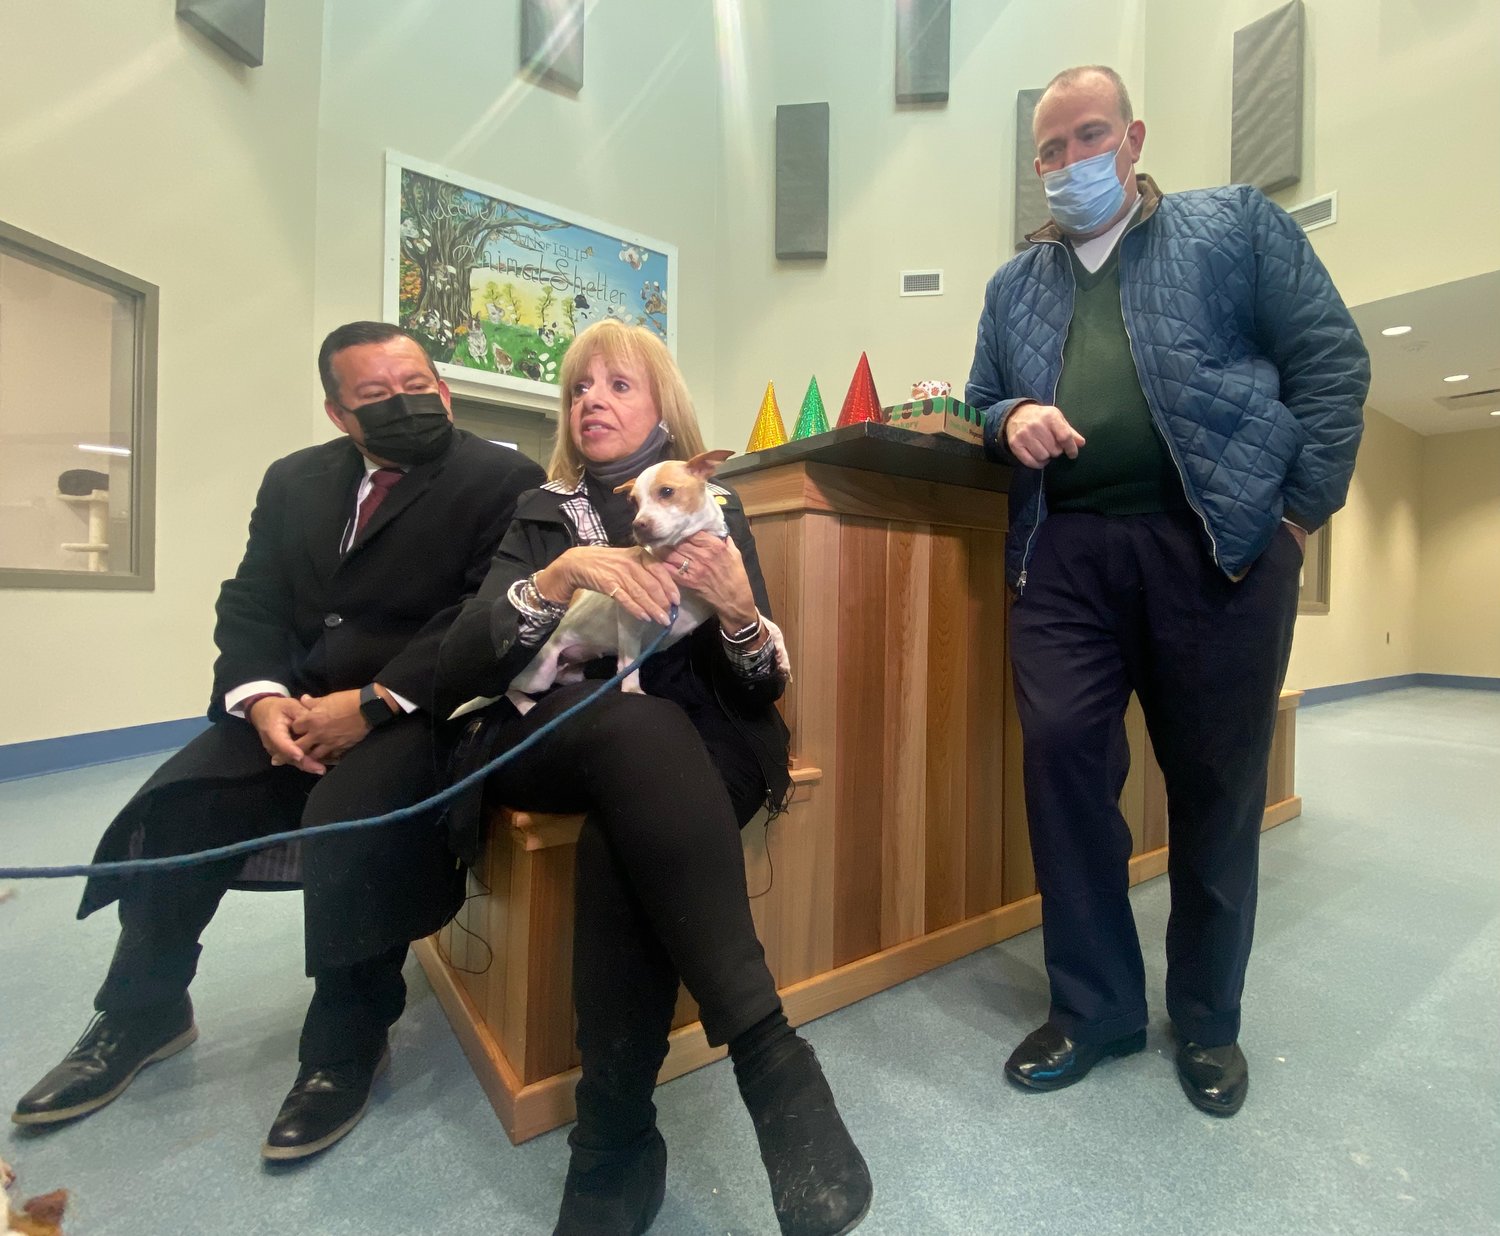 (From L to R) Town councilman Jorge Guadron, Islip Town supervisor Angie Carpenter and town councilman Jim O’Connor. Pup Allie sits on Carpenter’s lap.